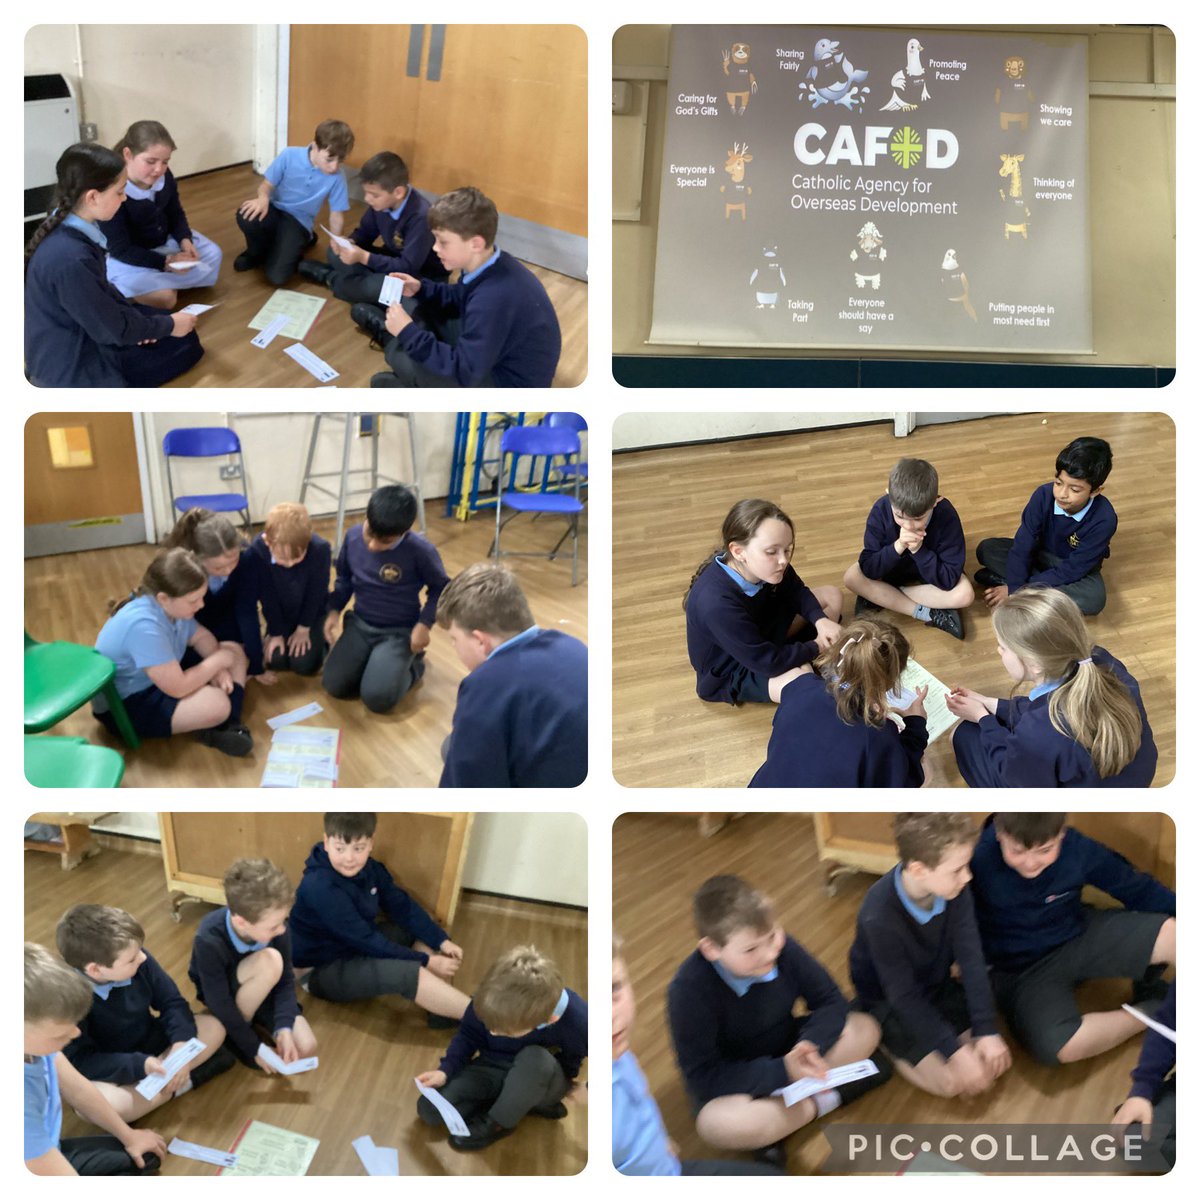 4B loved taking part in the CAFOD  workshop today. #LiveSimply